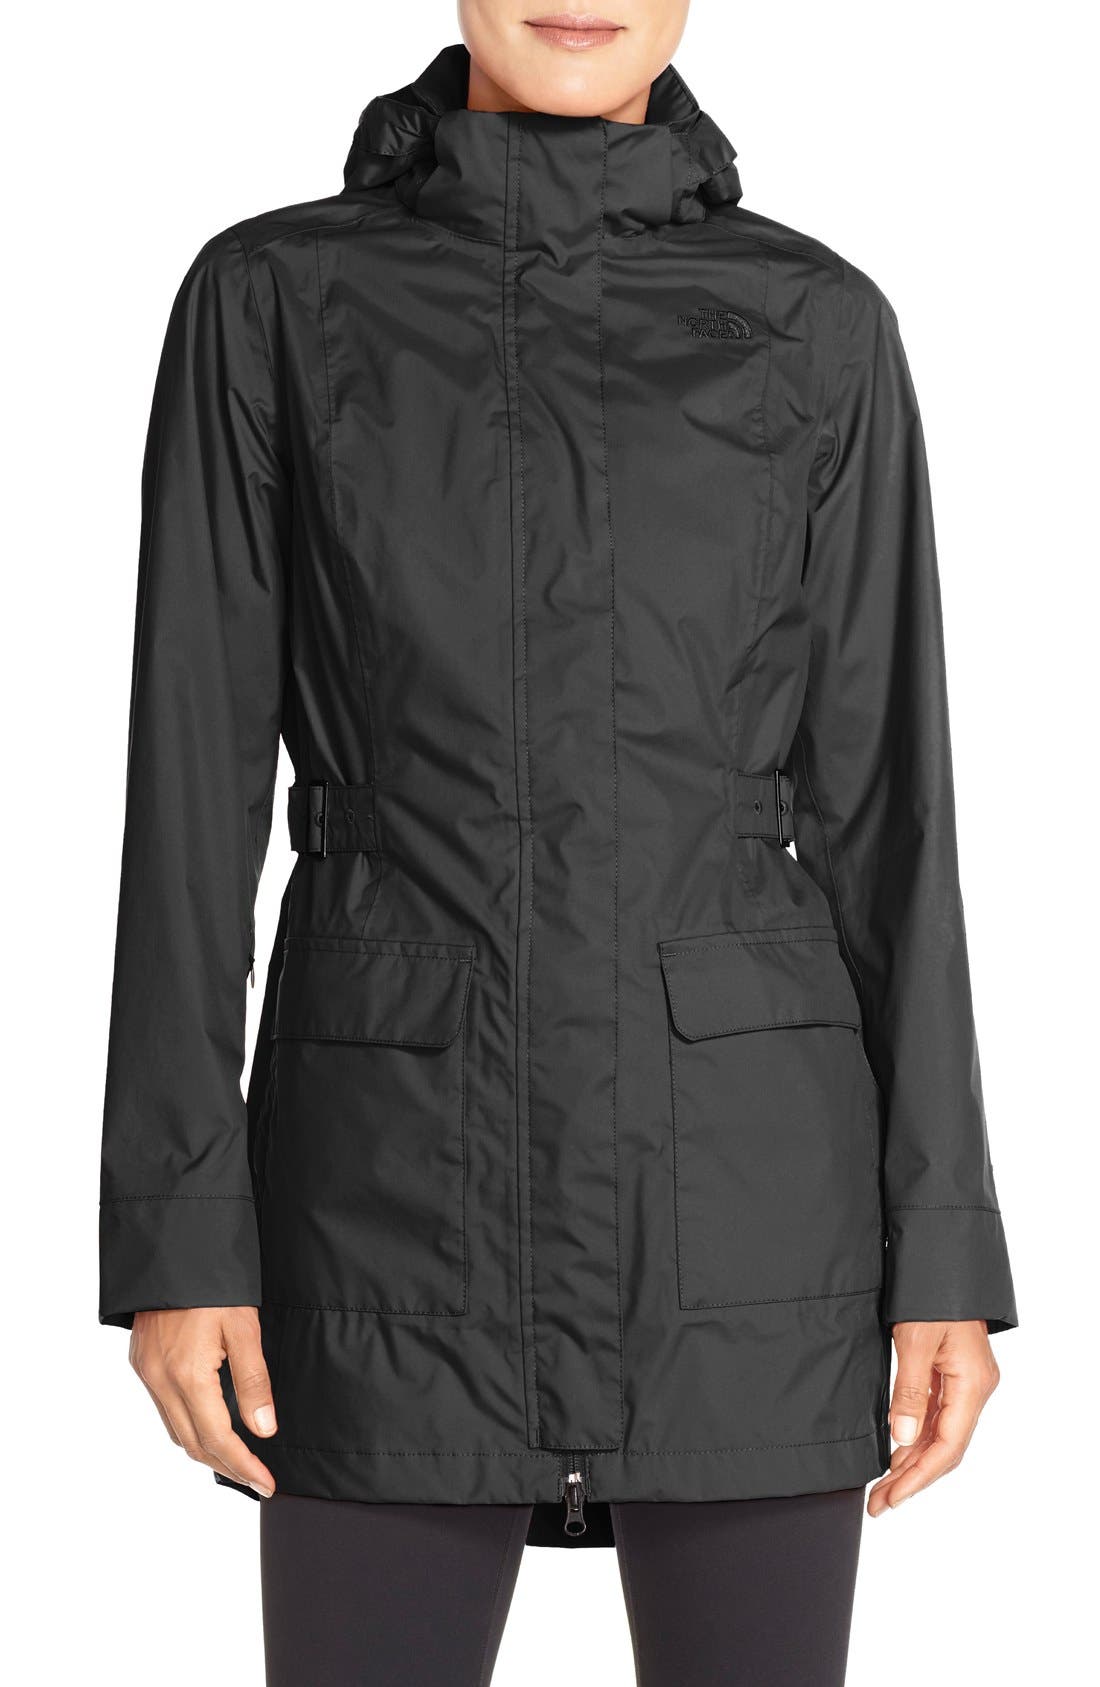 the north face tomales bay jacket